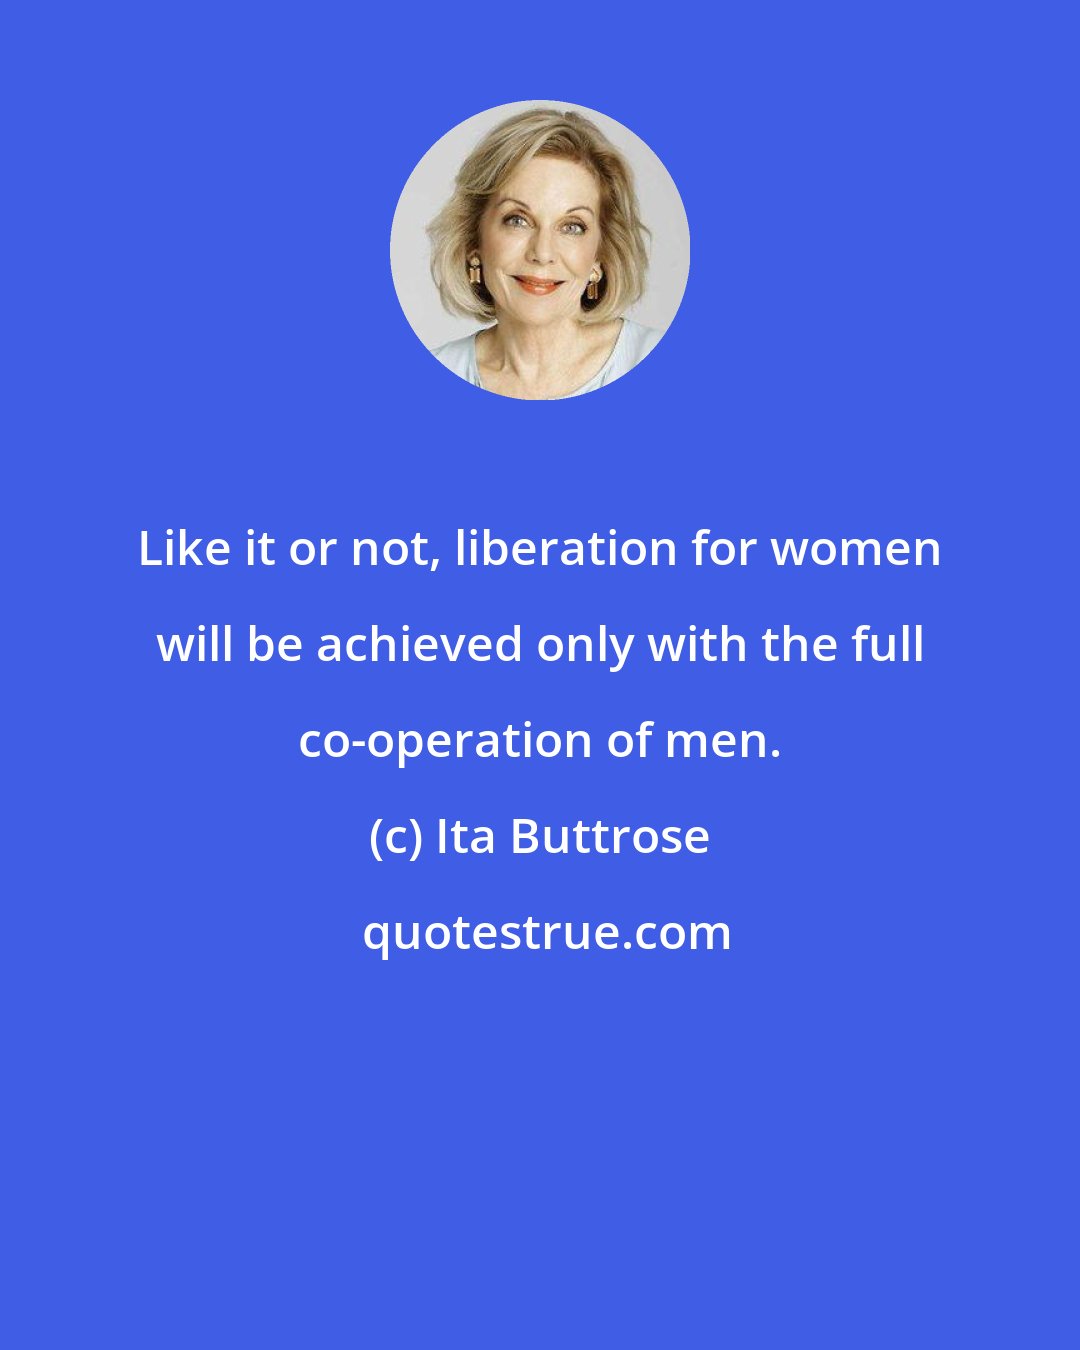 Ita Buttrose: Like it or not, liberation for women will be achieved only with the full co-operation of men.